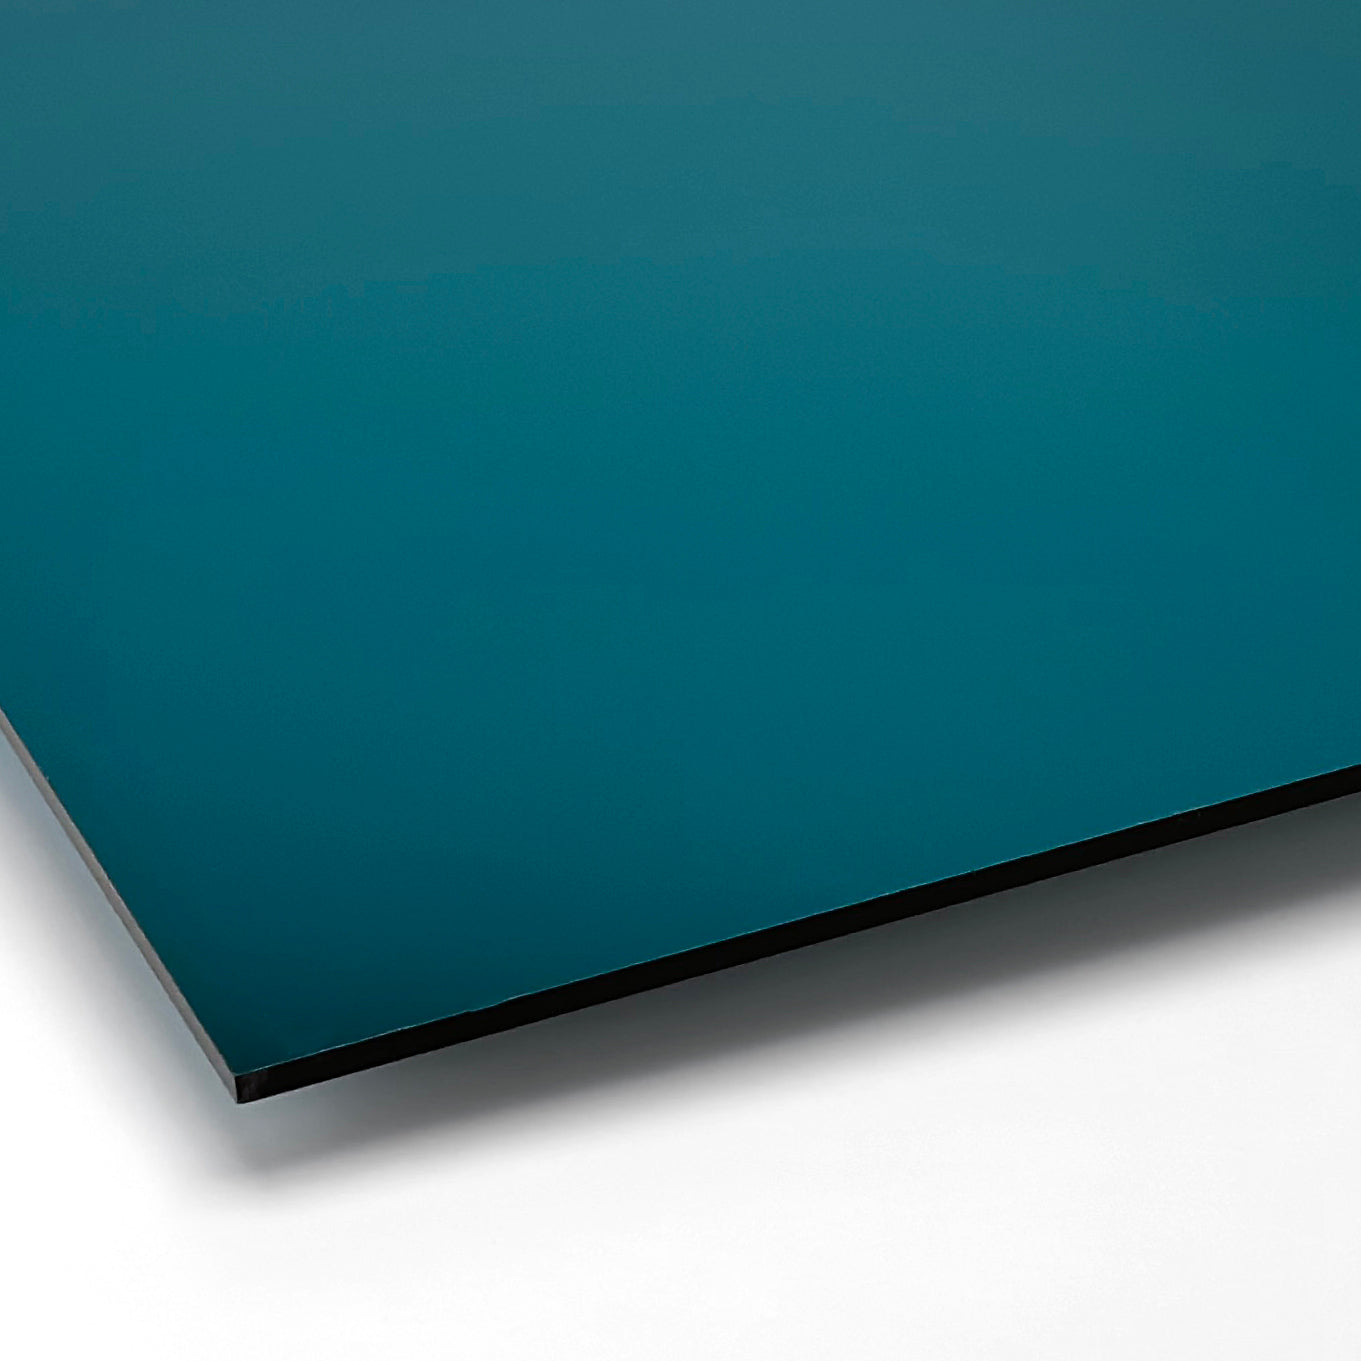 Mirror Jade Acrylic with laser cutting only - 600x400mm